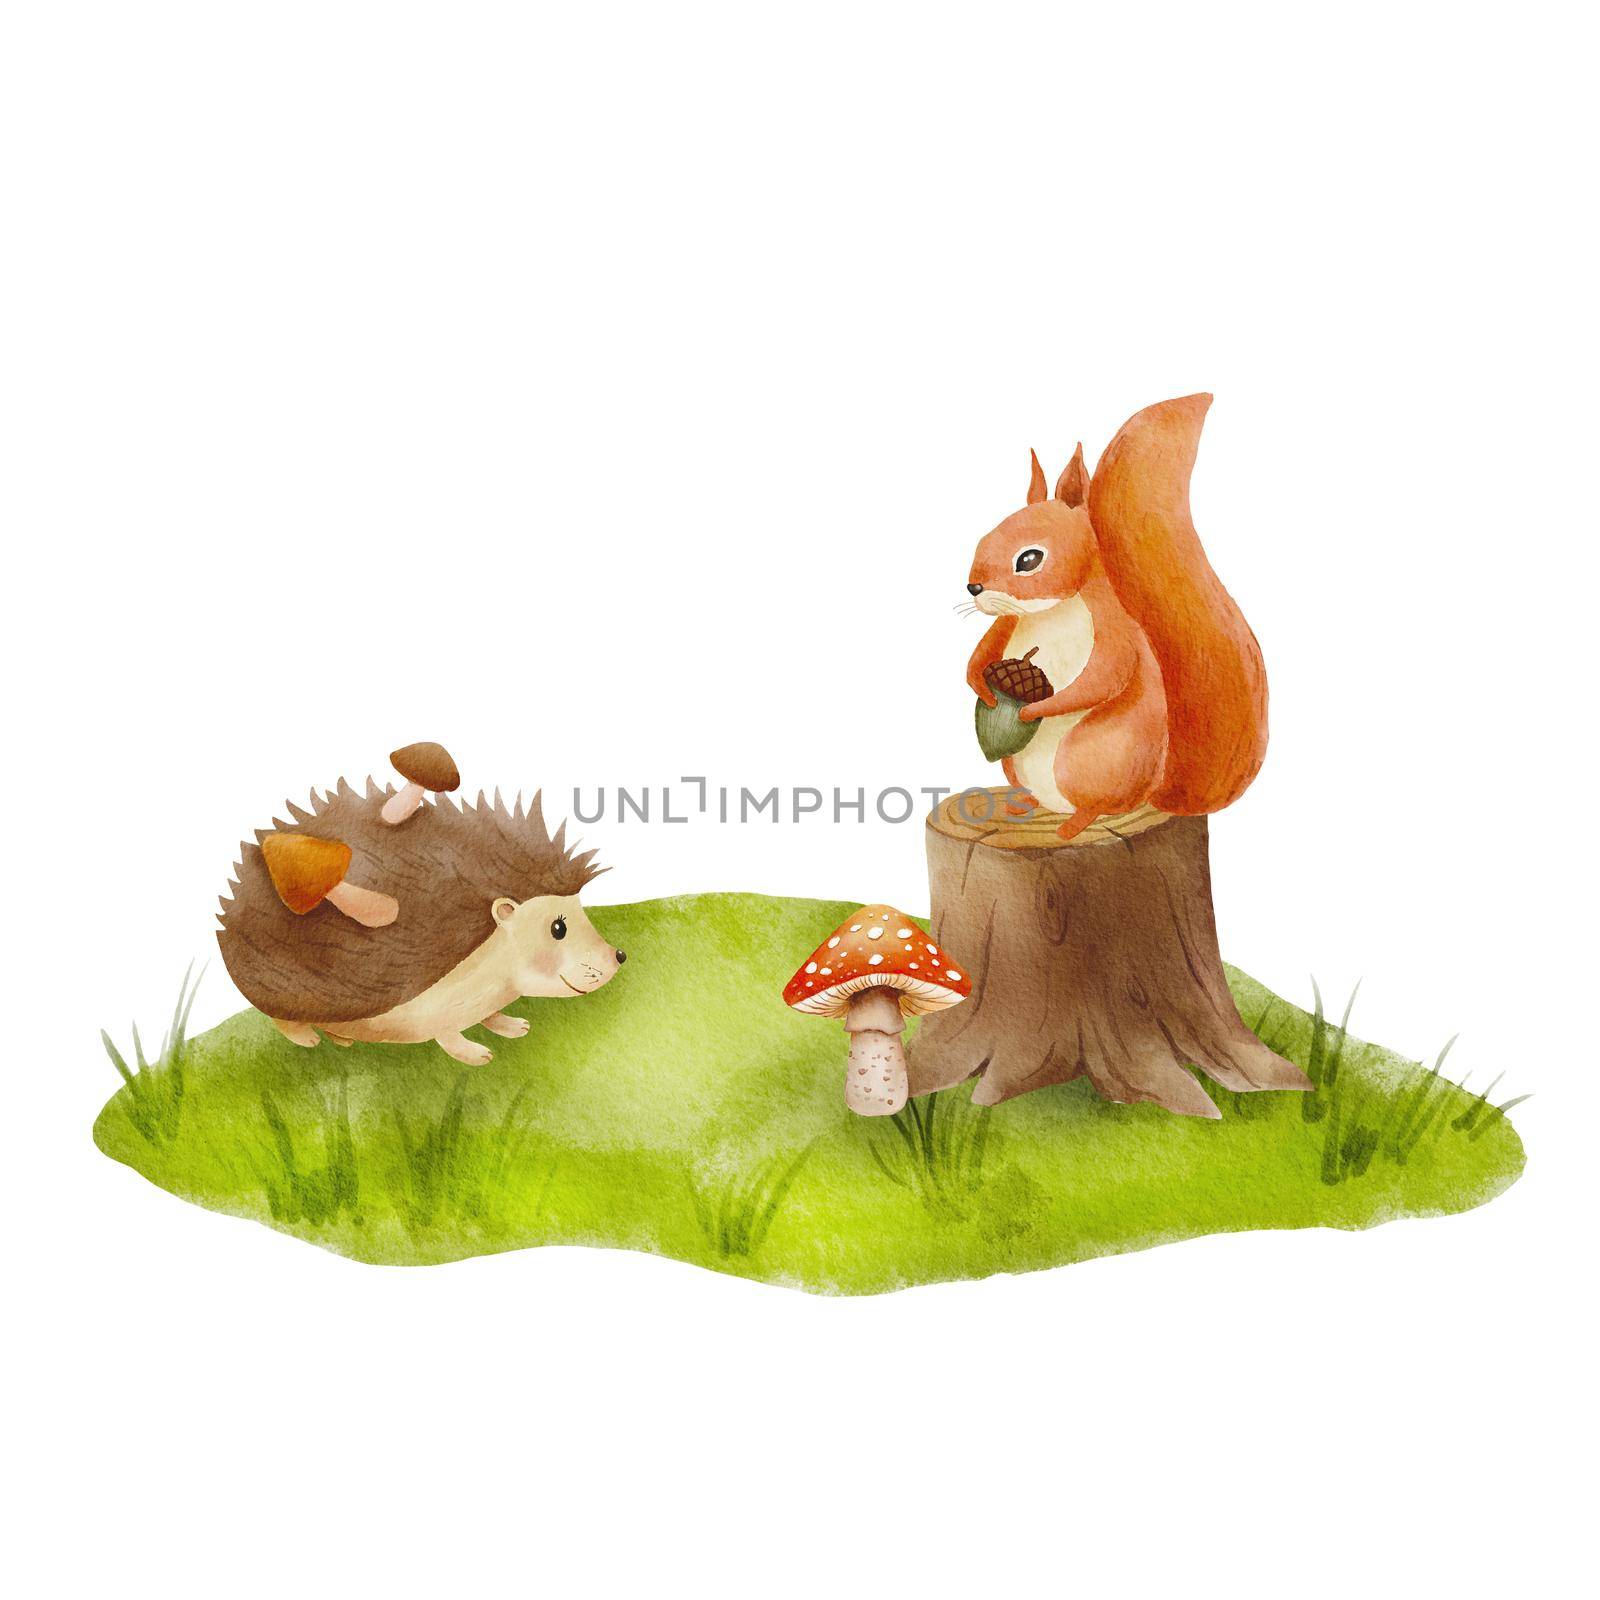 Watercolor hand drawn composition with woodland animals. Squirrel and hedgehog with mushrooms on forest clearing and stump. Fall season illustration for kids isolated on white by ElenaPlatova